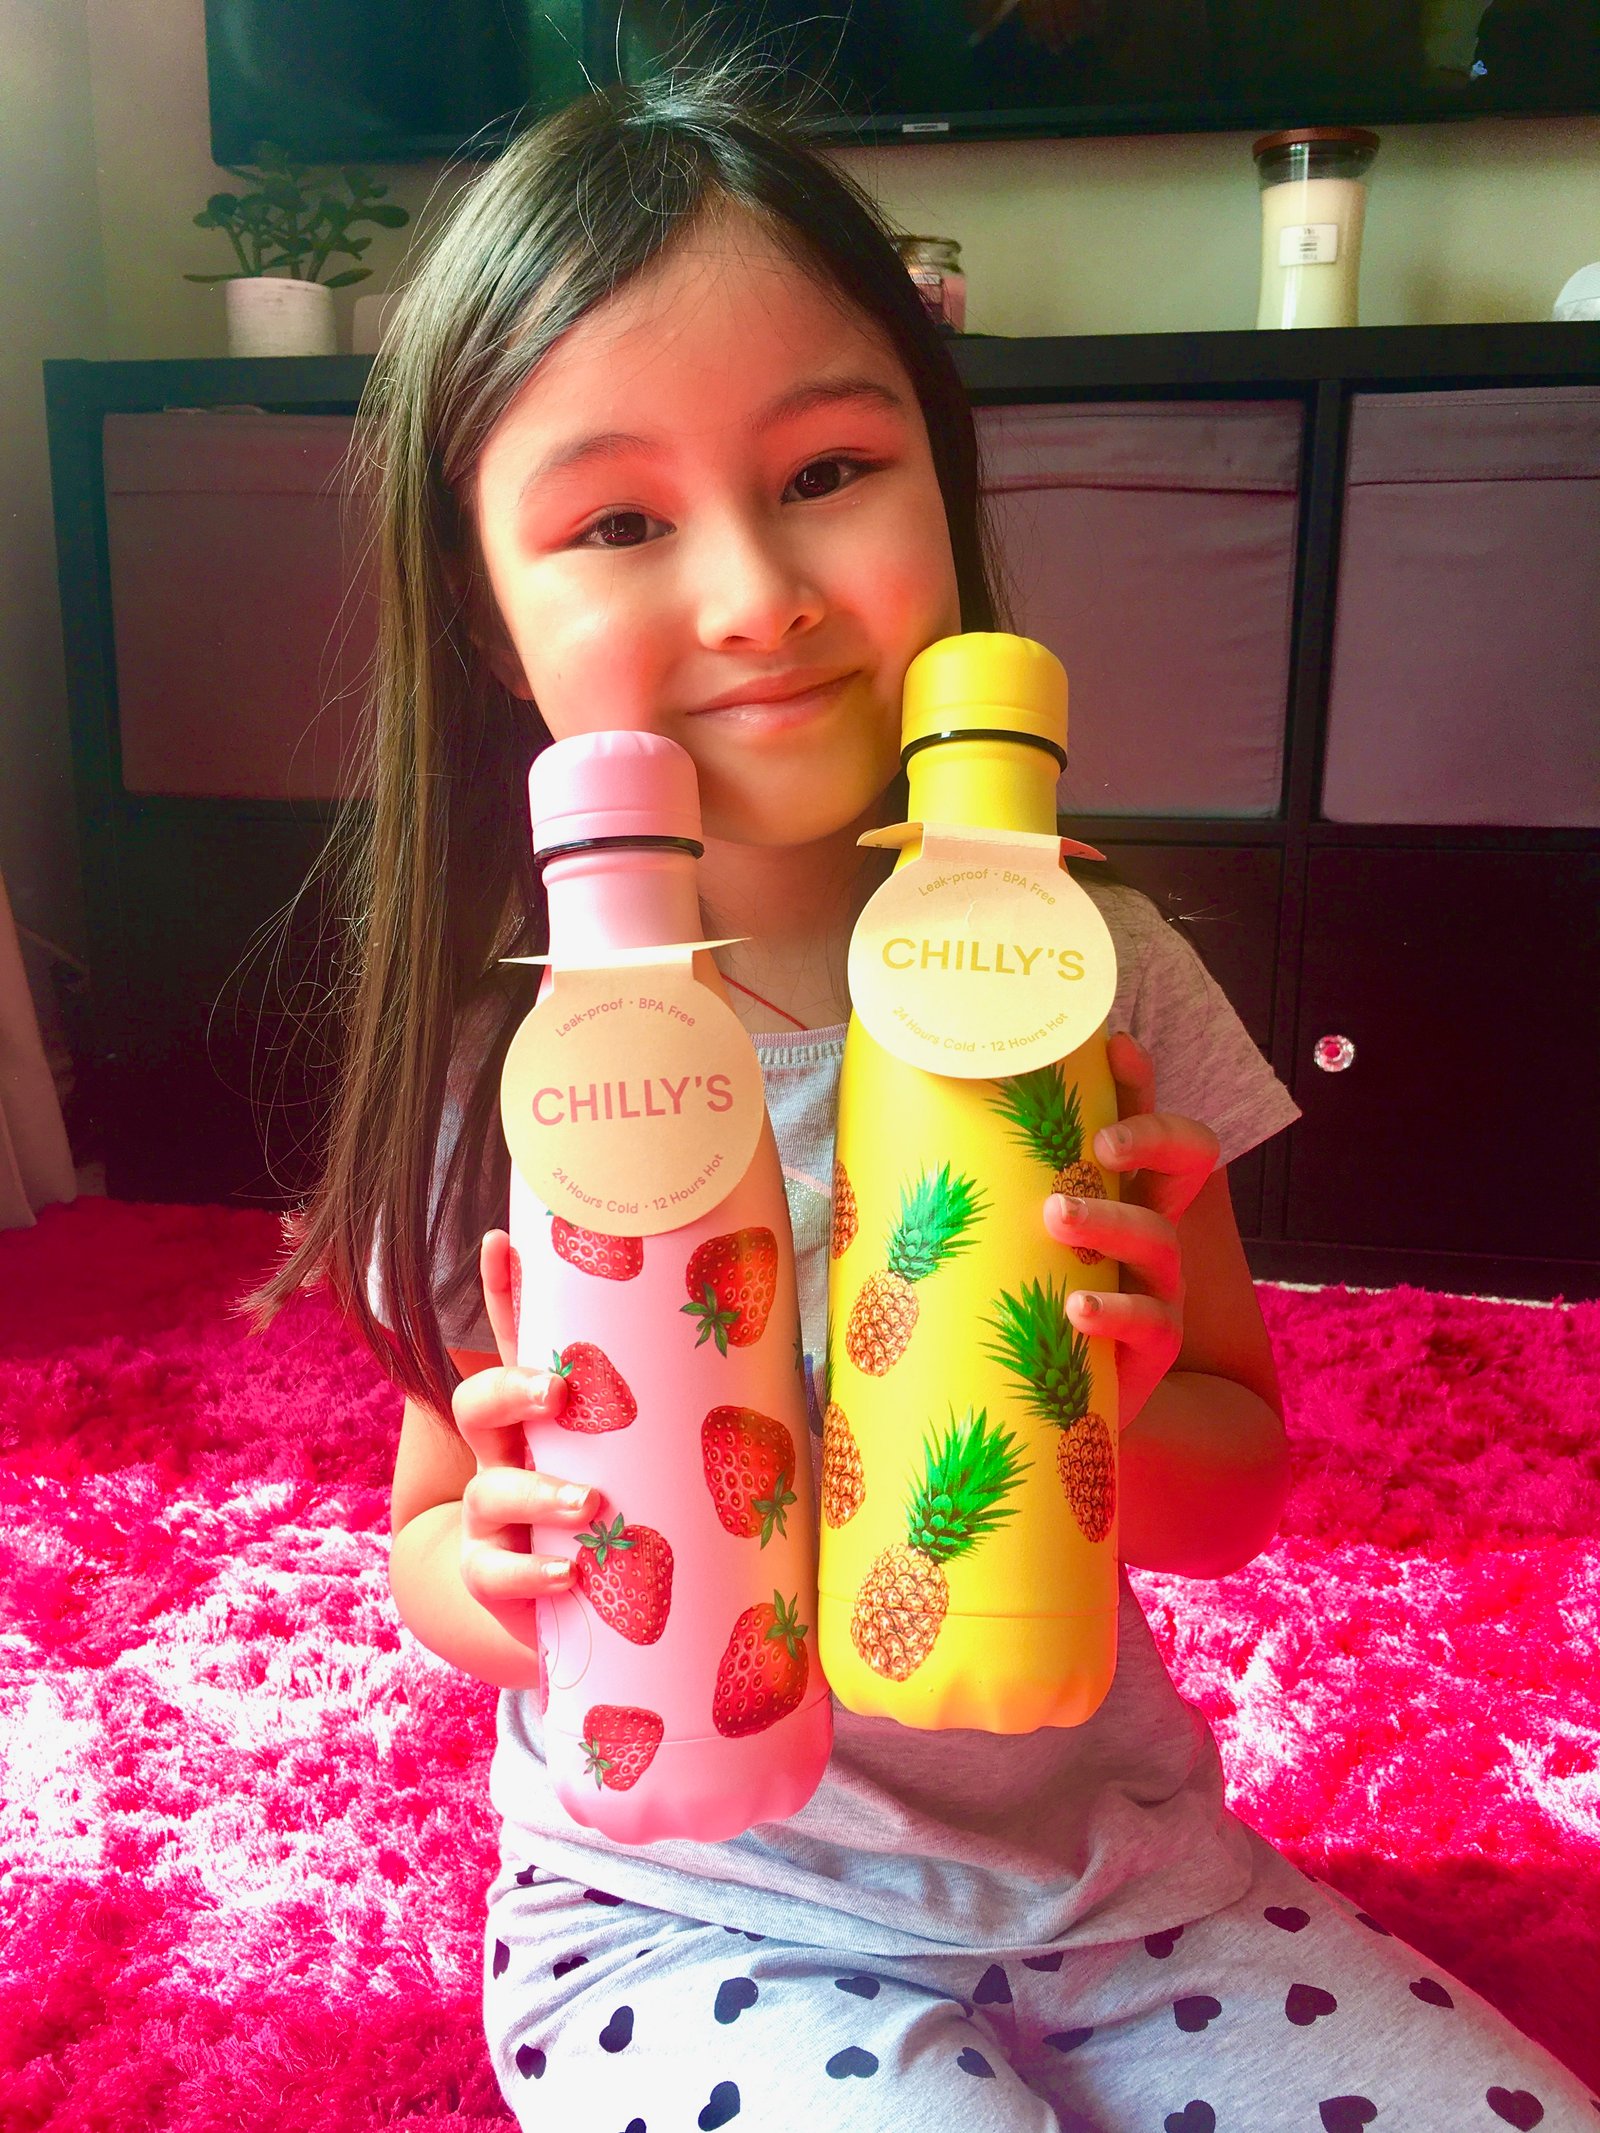 Lei Hang bought a Strawberry Chilly's bottle for herself and a Pineapple Chilly's bottle for Yasmin. Yasmin is happily showing the fruit monogram stainless steel flask water bottles.